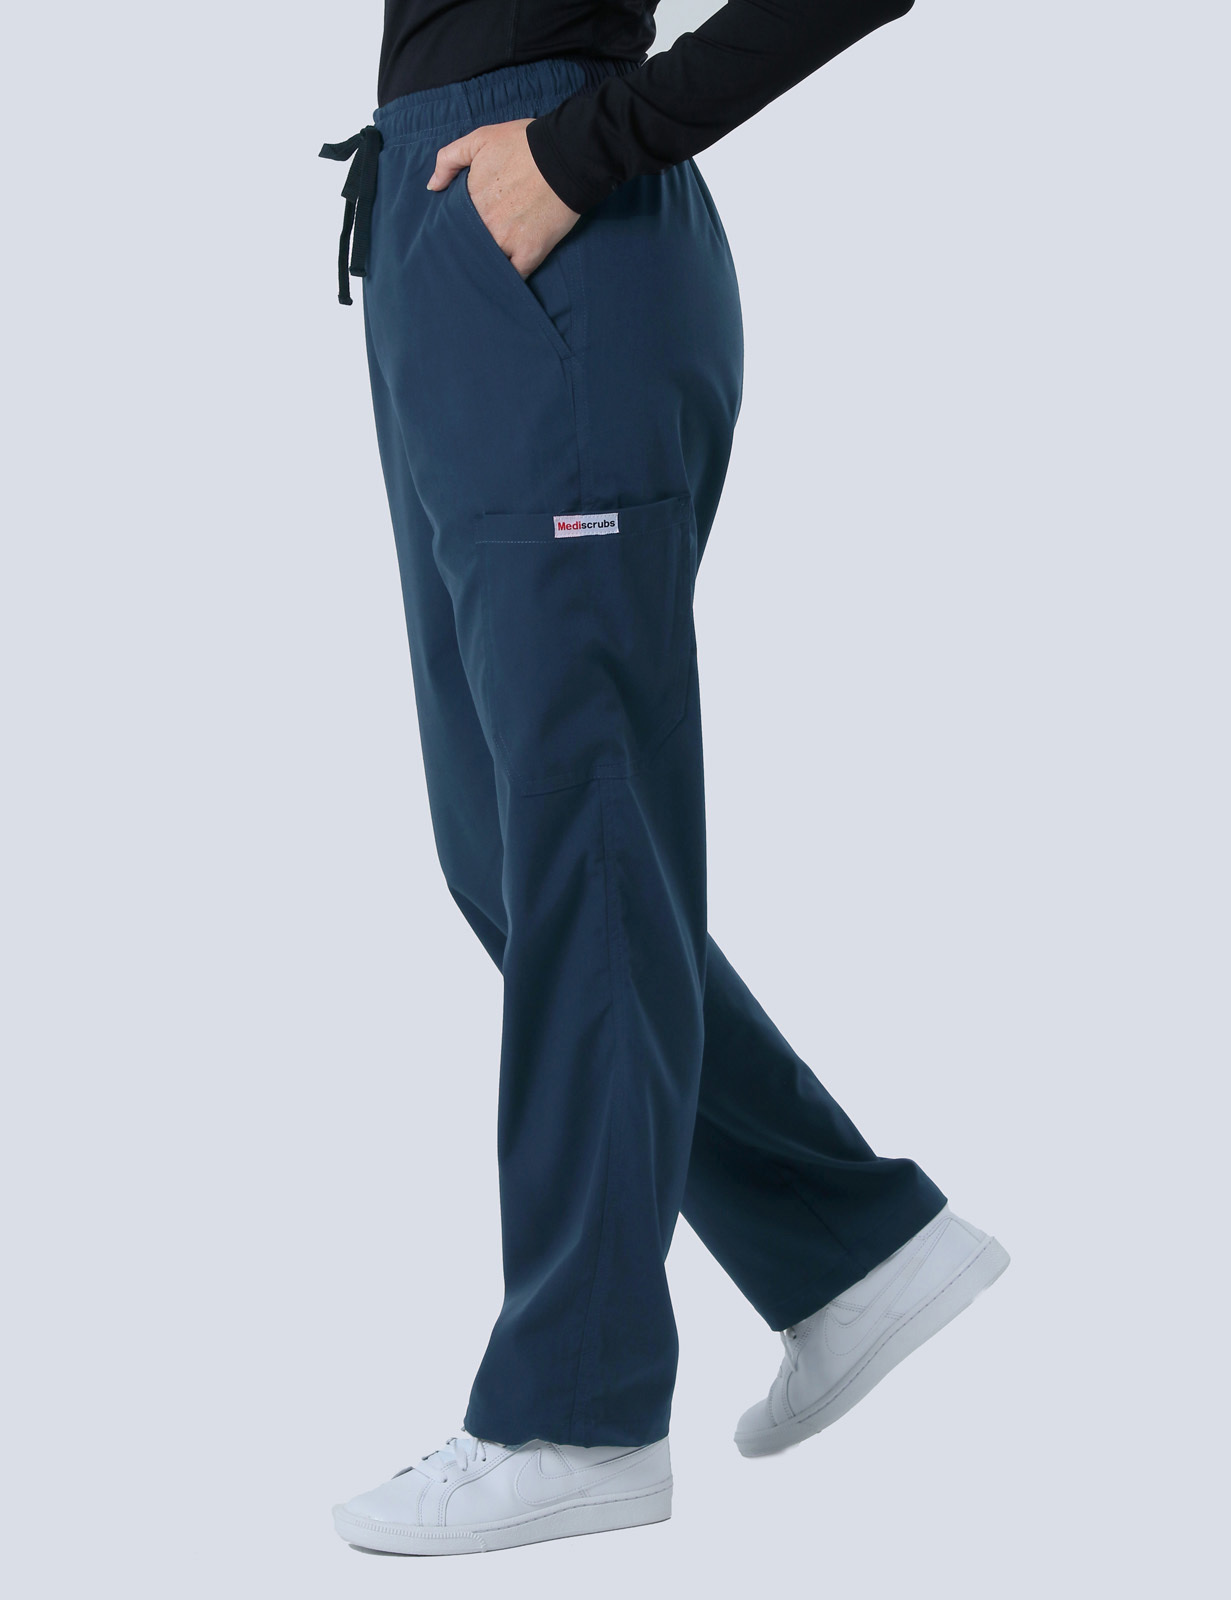 PAH - Cardiac Scientist (Women's Fit Solid Scrub Top and Cargo Pants in Navy incl Logos)